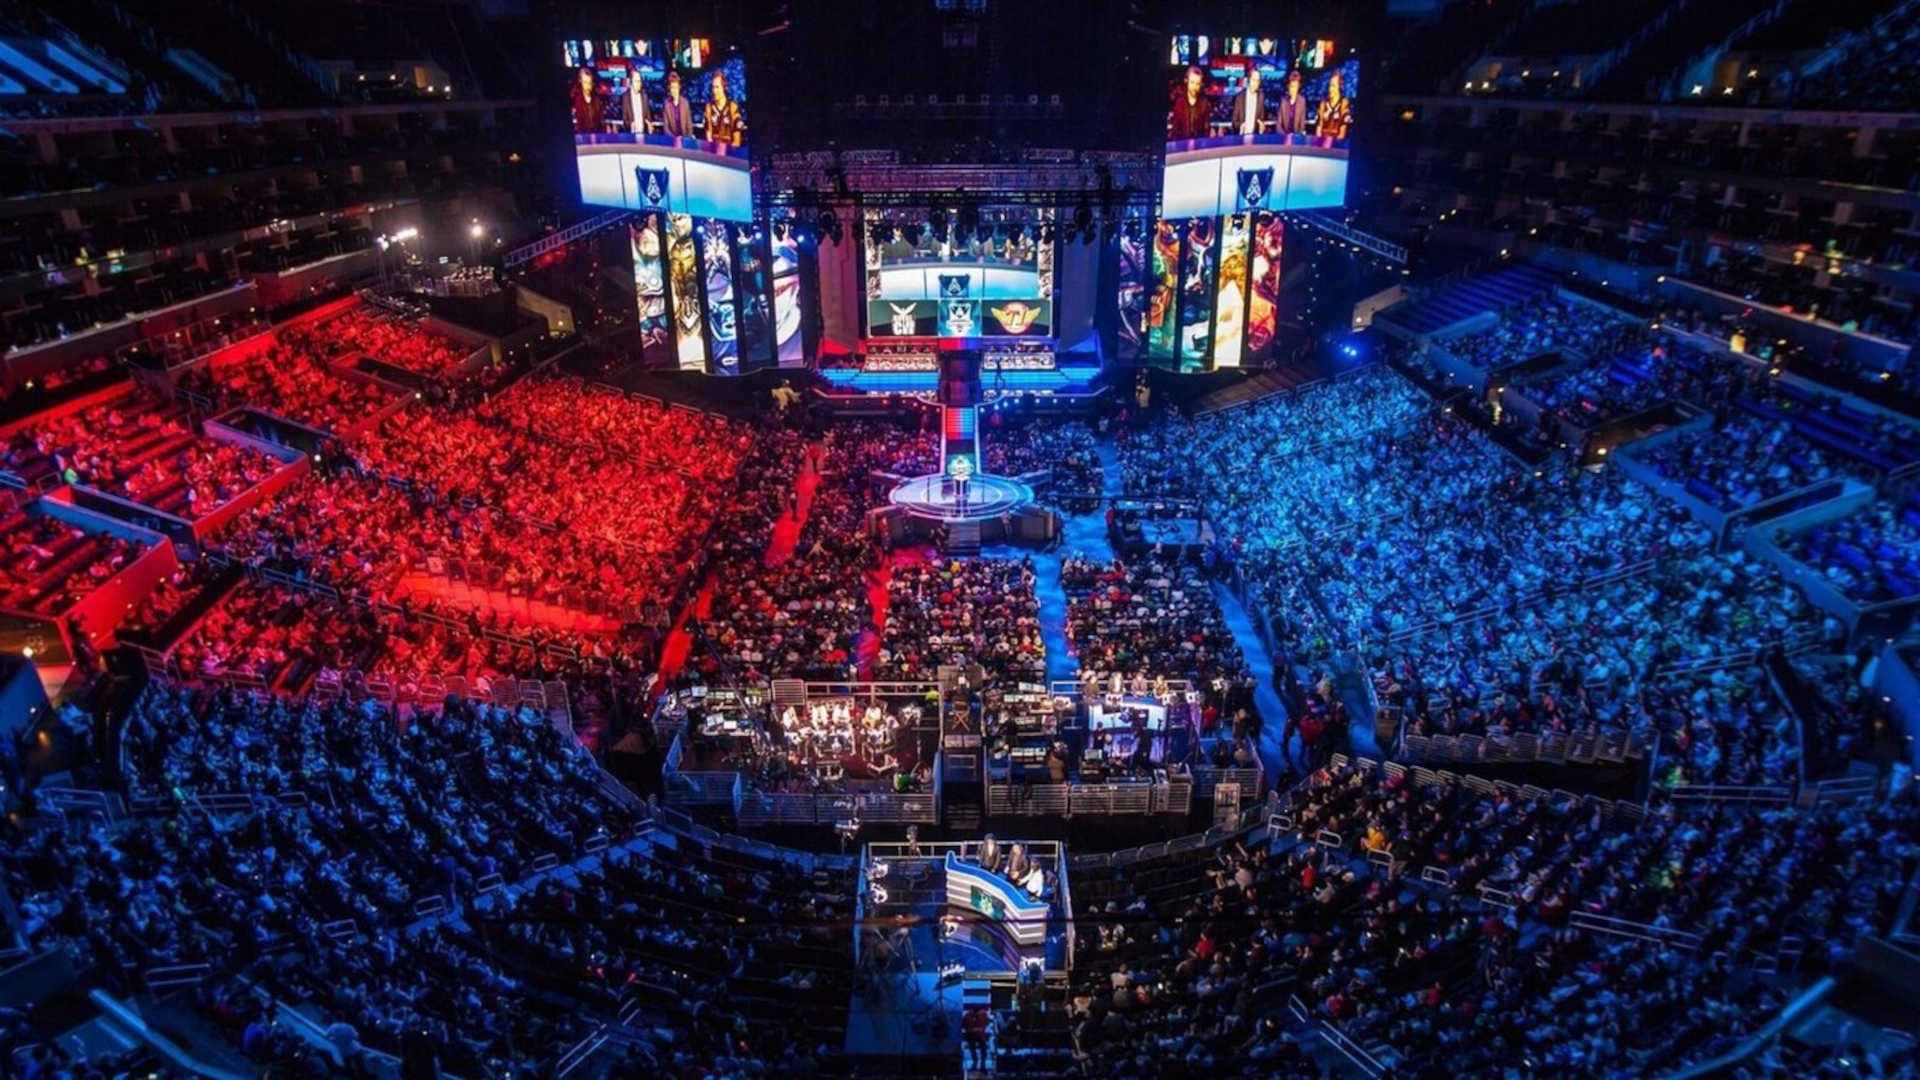 Format changes are coming to Worlds and MSI in 2023